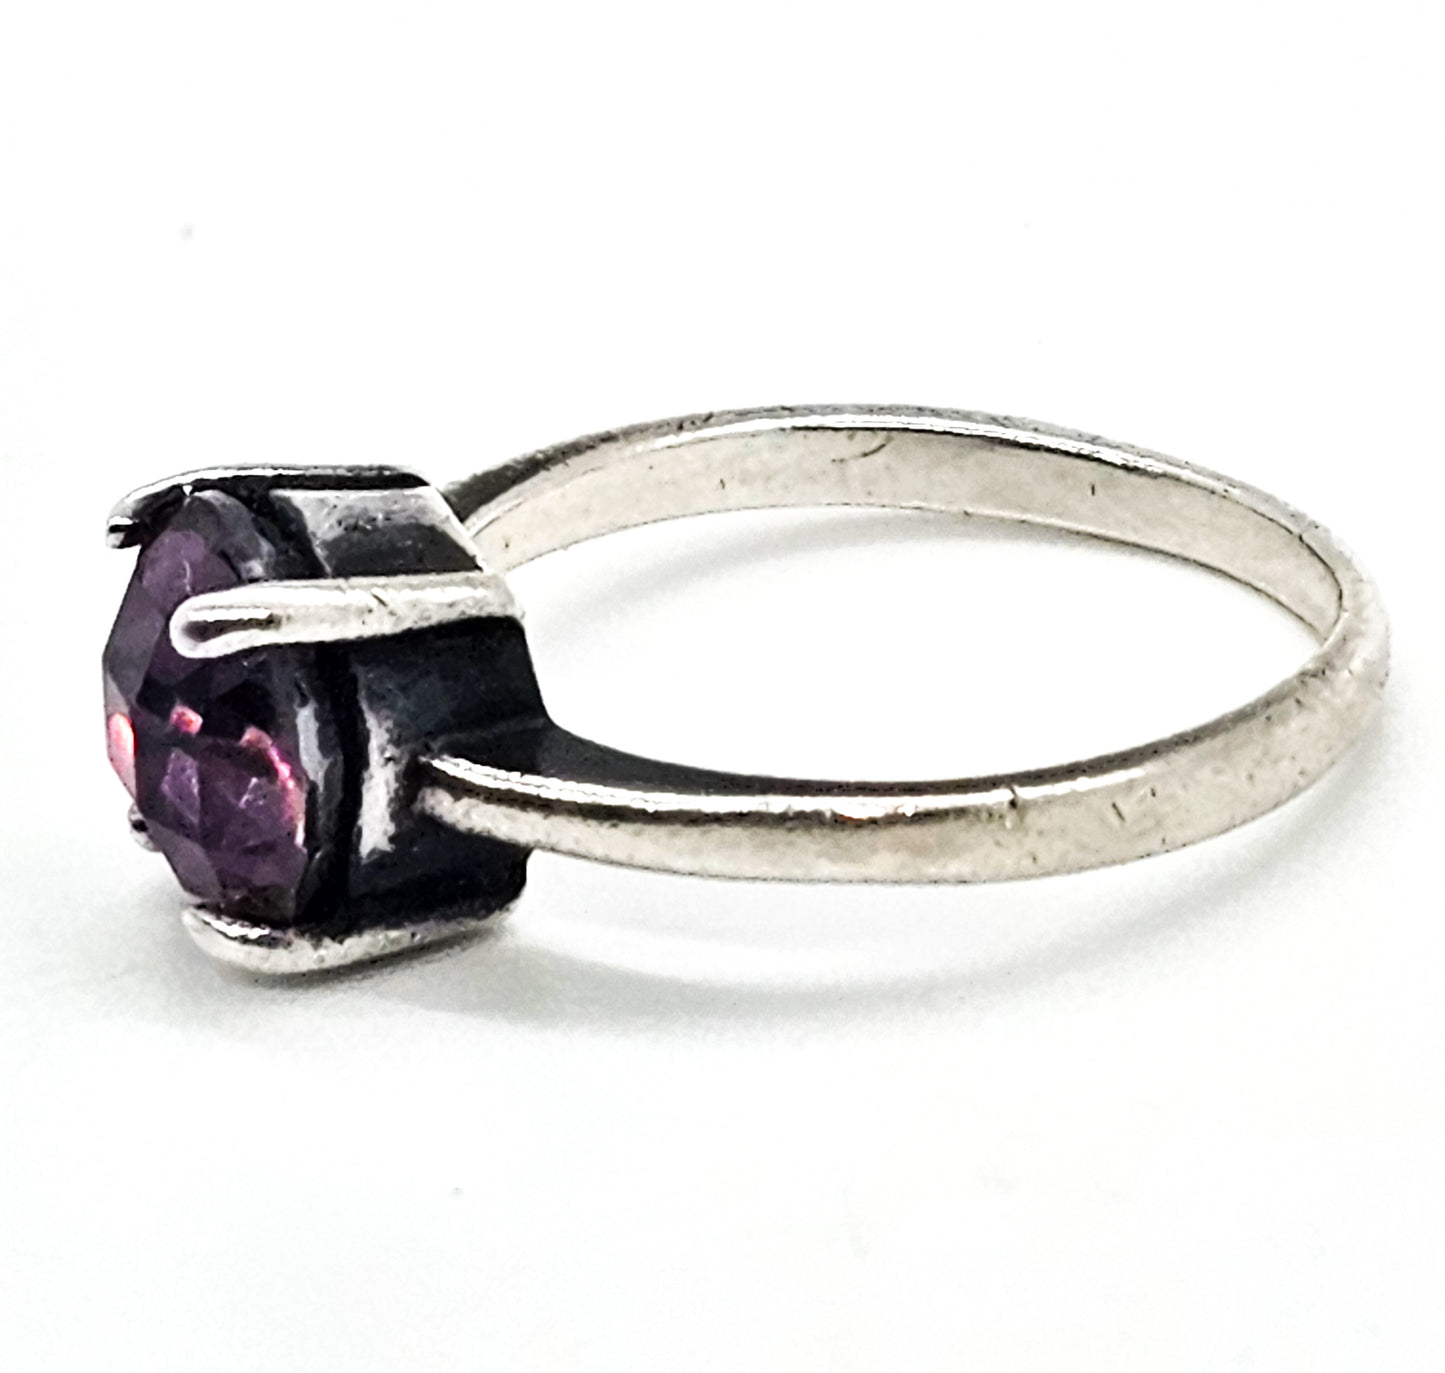 Mystic Topaz faceted round solitaire used sterling silver ring size 8